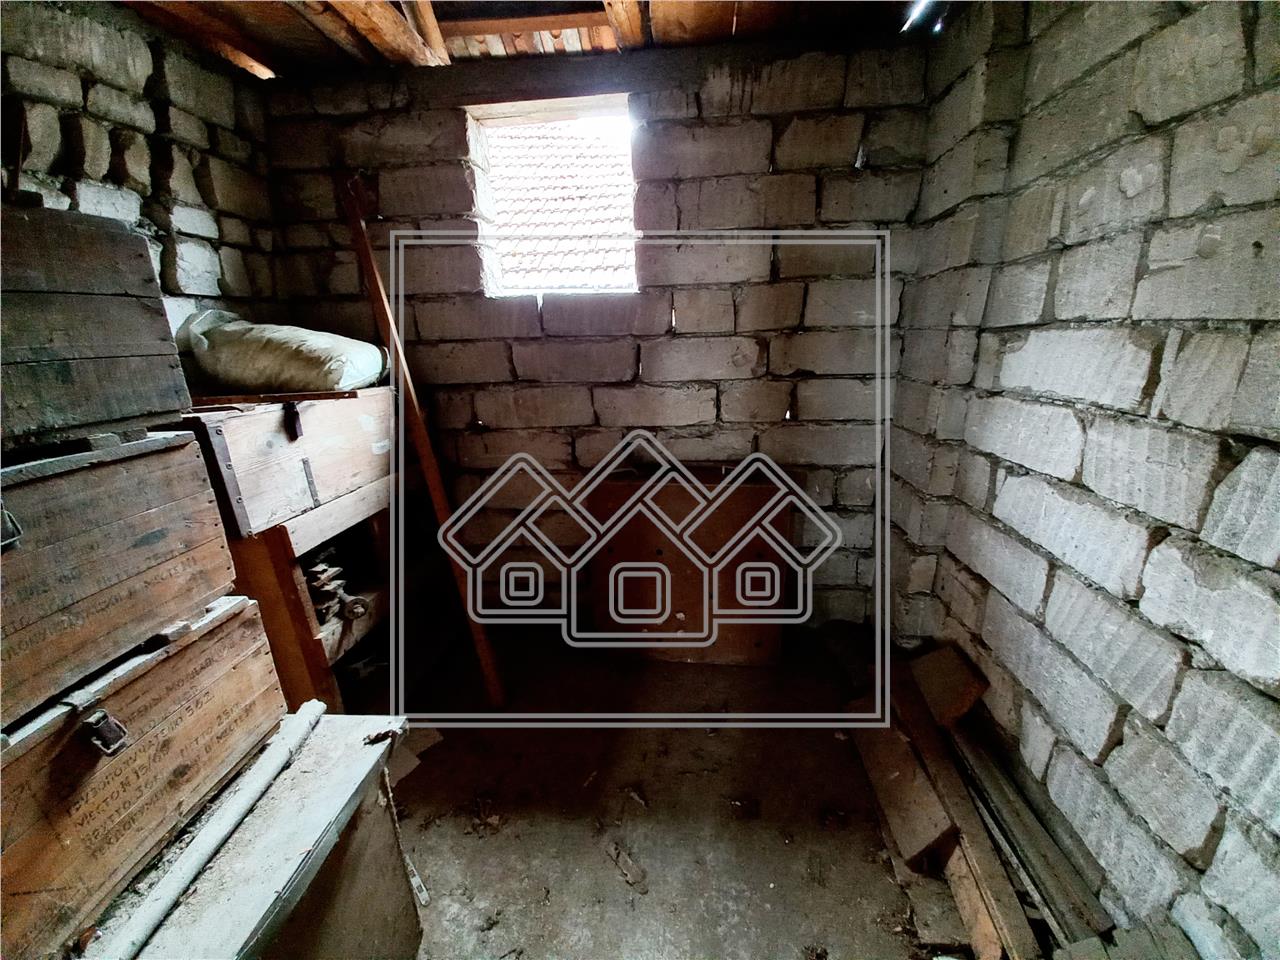 House for sale in Cugur - 5 rooms - 130 usable sqm